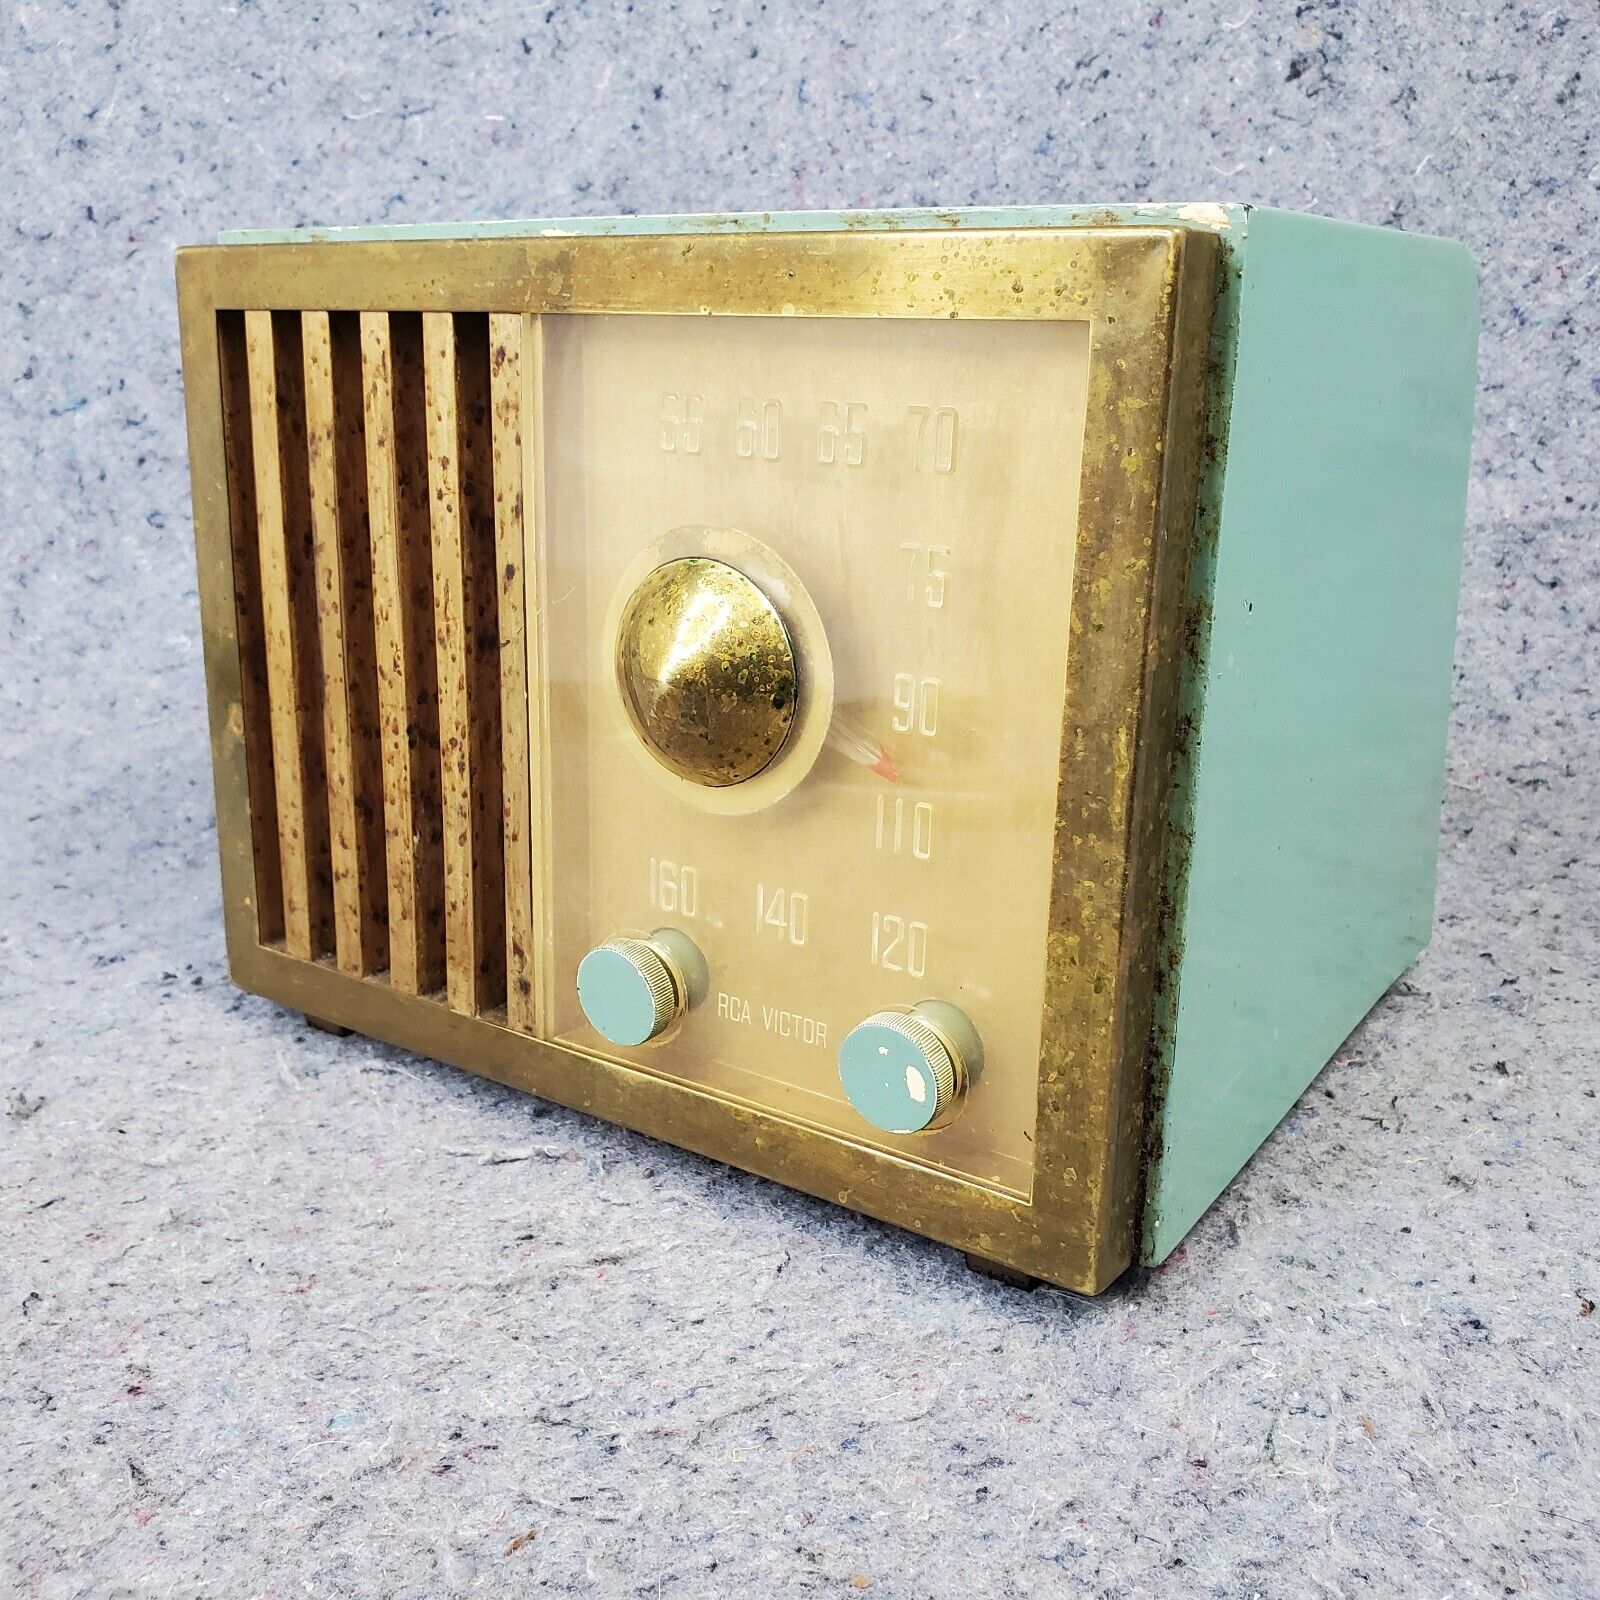 RCA Victor Tube Radio Model 75X12 AM Turquoise Blue 1950 MCM Vintage Not Working